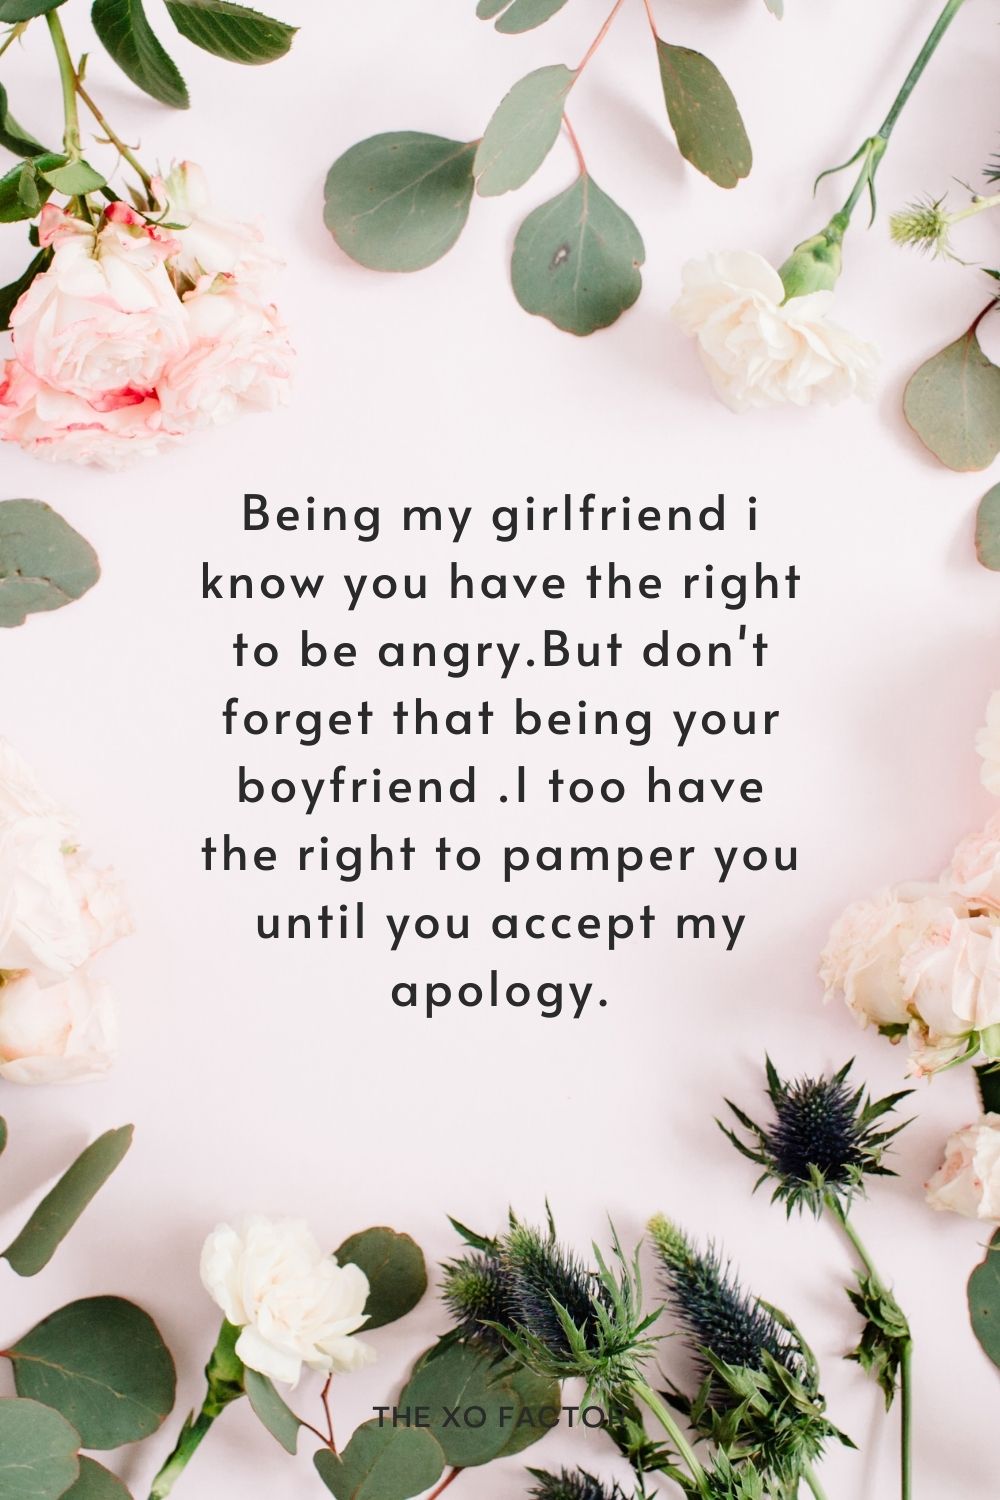 Being my girlfriend i know you have the right to be angry.But don't forget that being your boyfriend .I too have the right to pamper you until you accept my apology